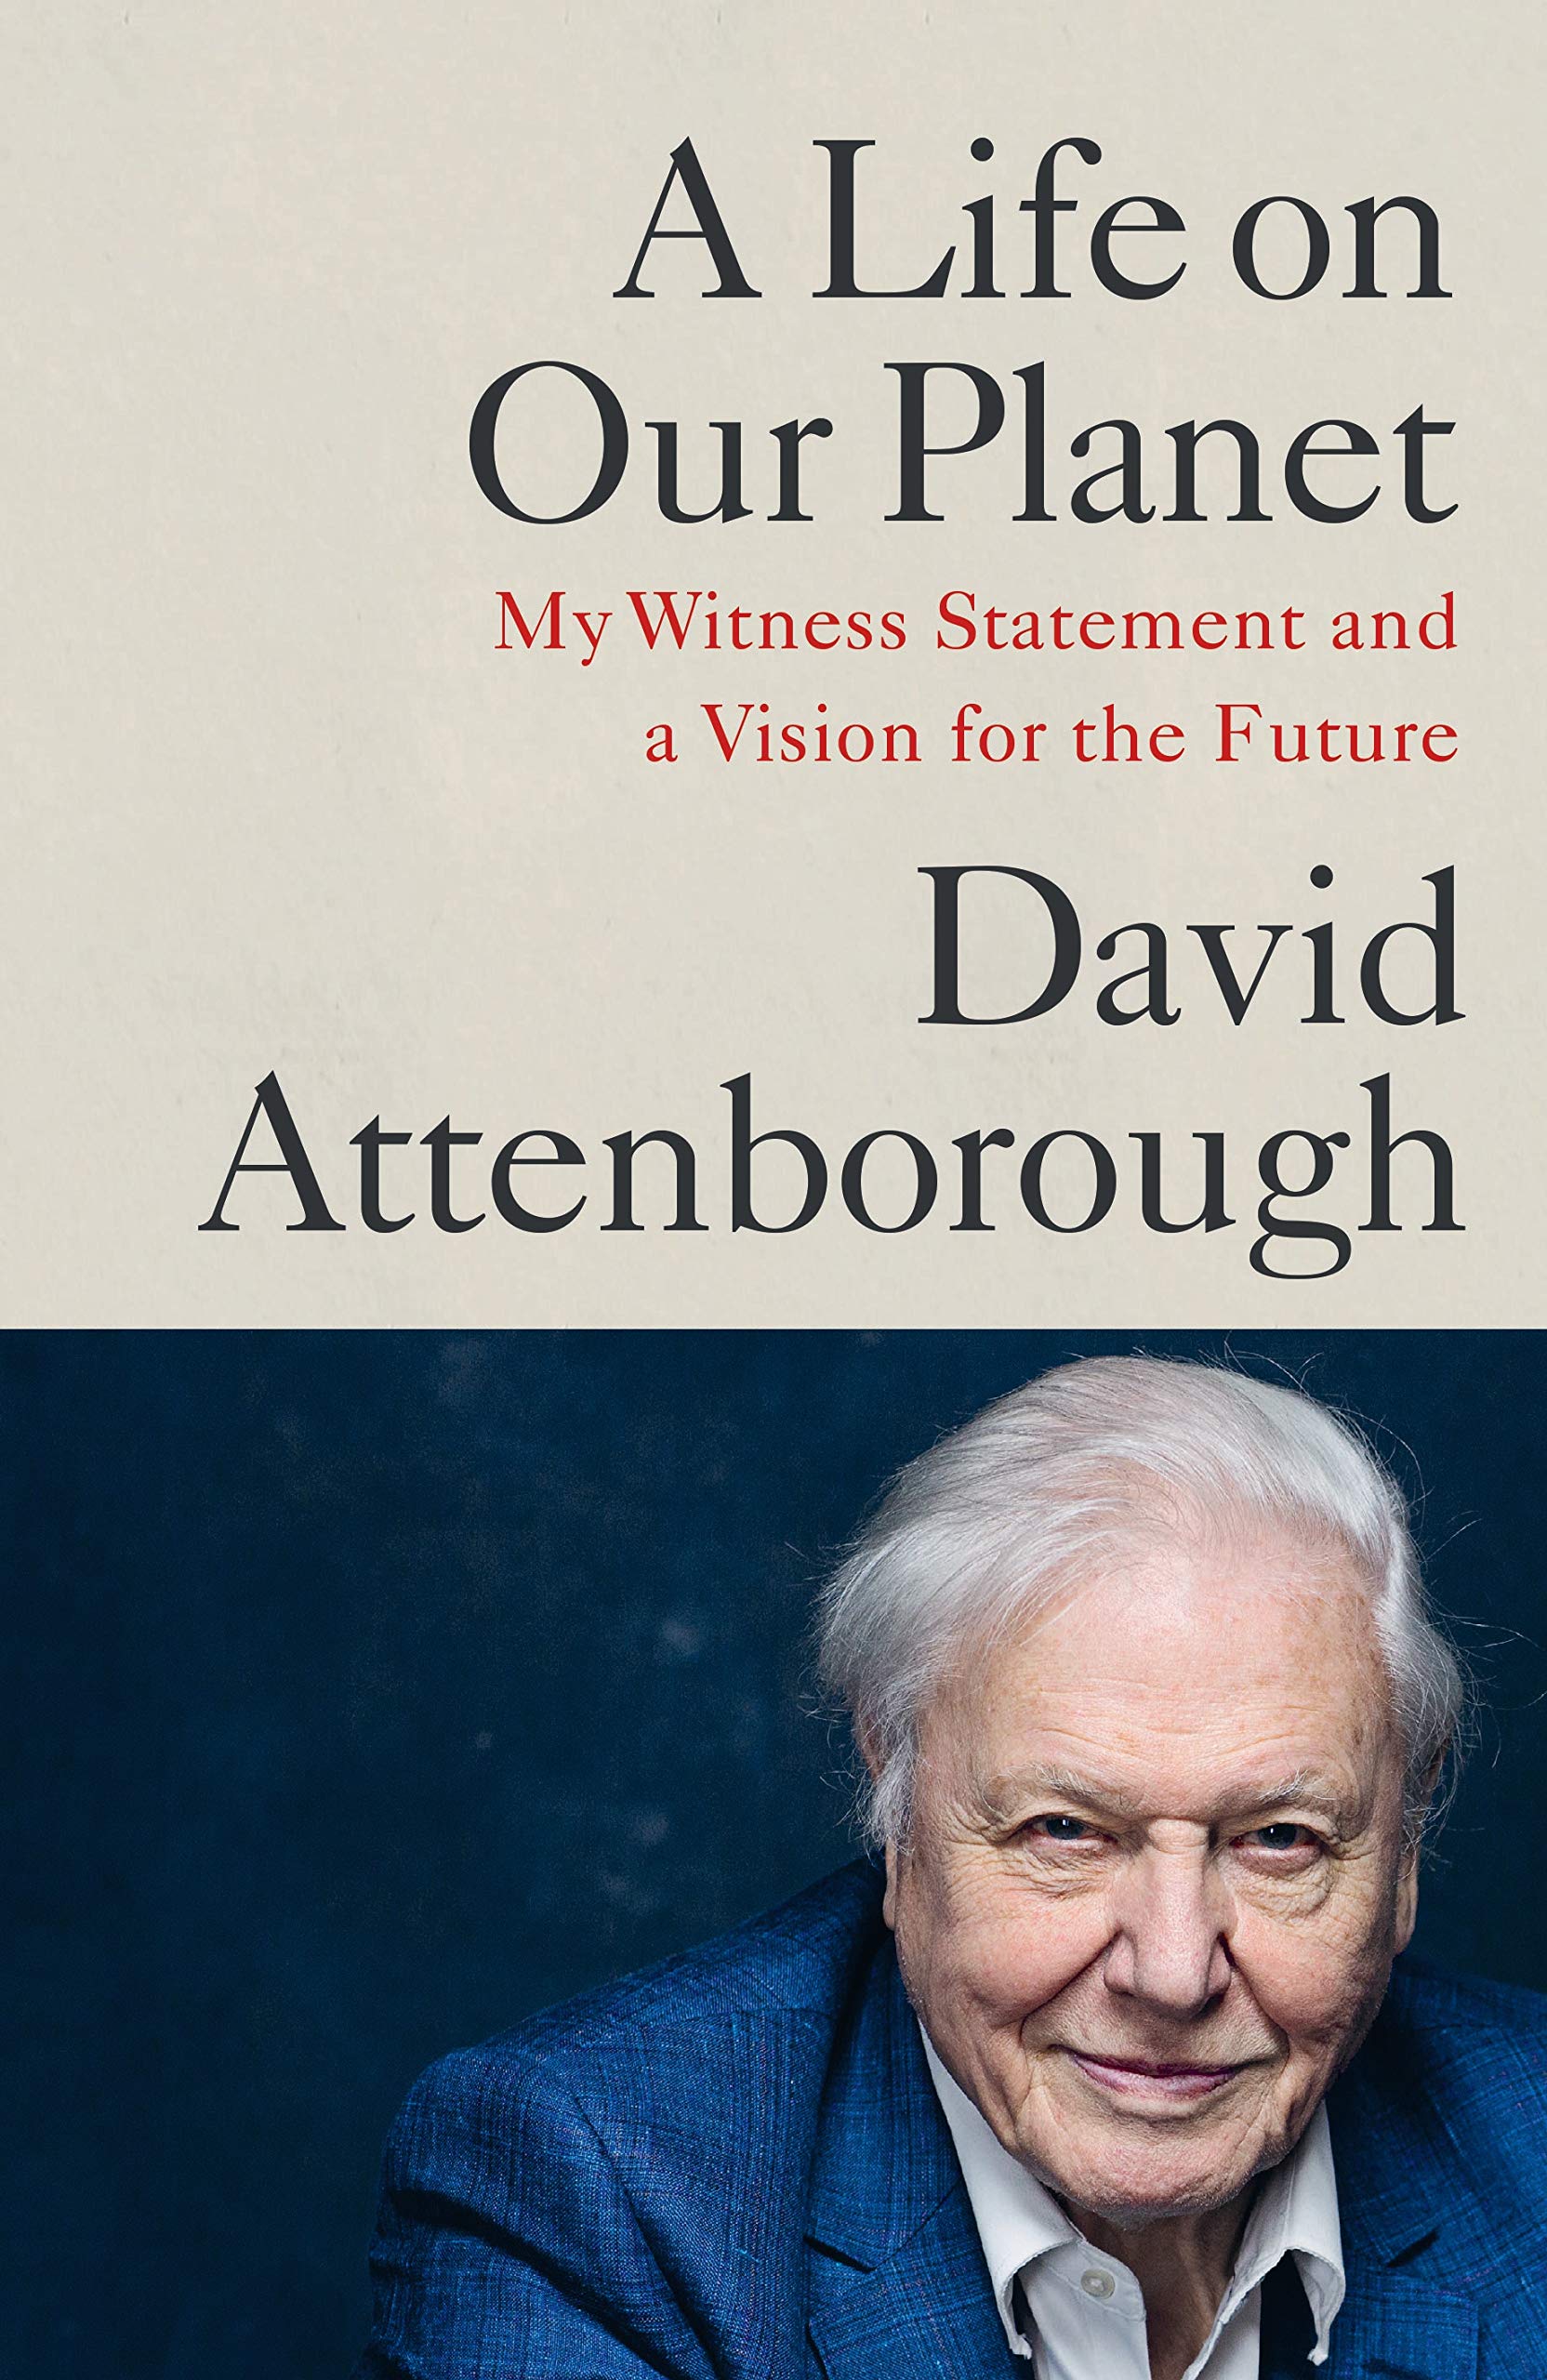 Life on Our Planet | David Attenborough